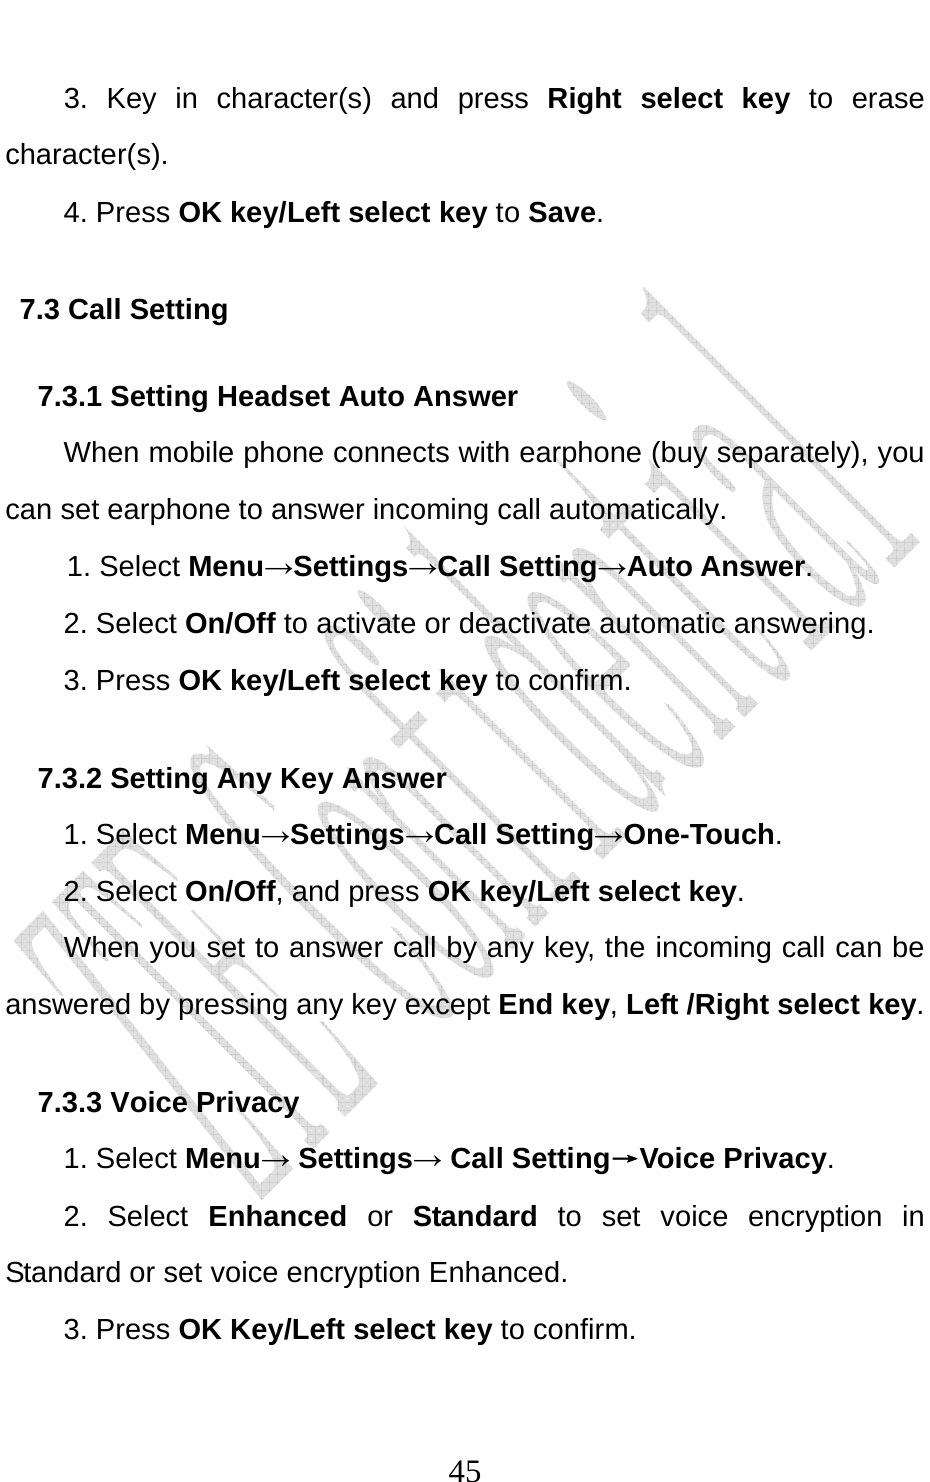                              453. Key in character(s) and press Right select key  to erase character(s). 4. Press OK key/Left select key to Save. 7.3 Call Setting 7.3.1 Setting Headset Auto Answer When mobile phone connects with earphone (buy separately), you can set earphone to answer incoming call automatically. 1. Select Menu→Settings→Call Setting→Auto Answer. 2. Select On/Off to activate or deactivate automatic answering.   3. Press OK key/Left select key to confirm. 7.3.2 Setting Any Key Answer 1. Select Menu→Settings→Call Setting→One-Touch. 2. Select On/Off, and press OK key/Left select key.         When you set to answer call by any key, the incoming call can be answered by pressing any key except End key, Left /Right select key. 7.3.3 Voice Privacy 1. Select Menu→ Settings→ Call Setting→Voice Privacy. 2. Select Enhanced or Standard to set voice encryption in Standard or set voice encryption Enhanced. 3. Press OK Key/Left select key to confirm. 